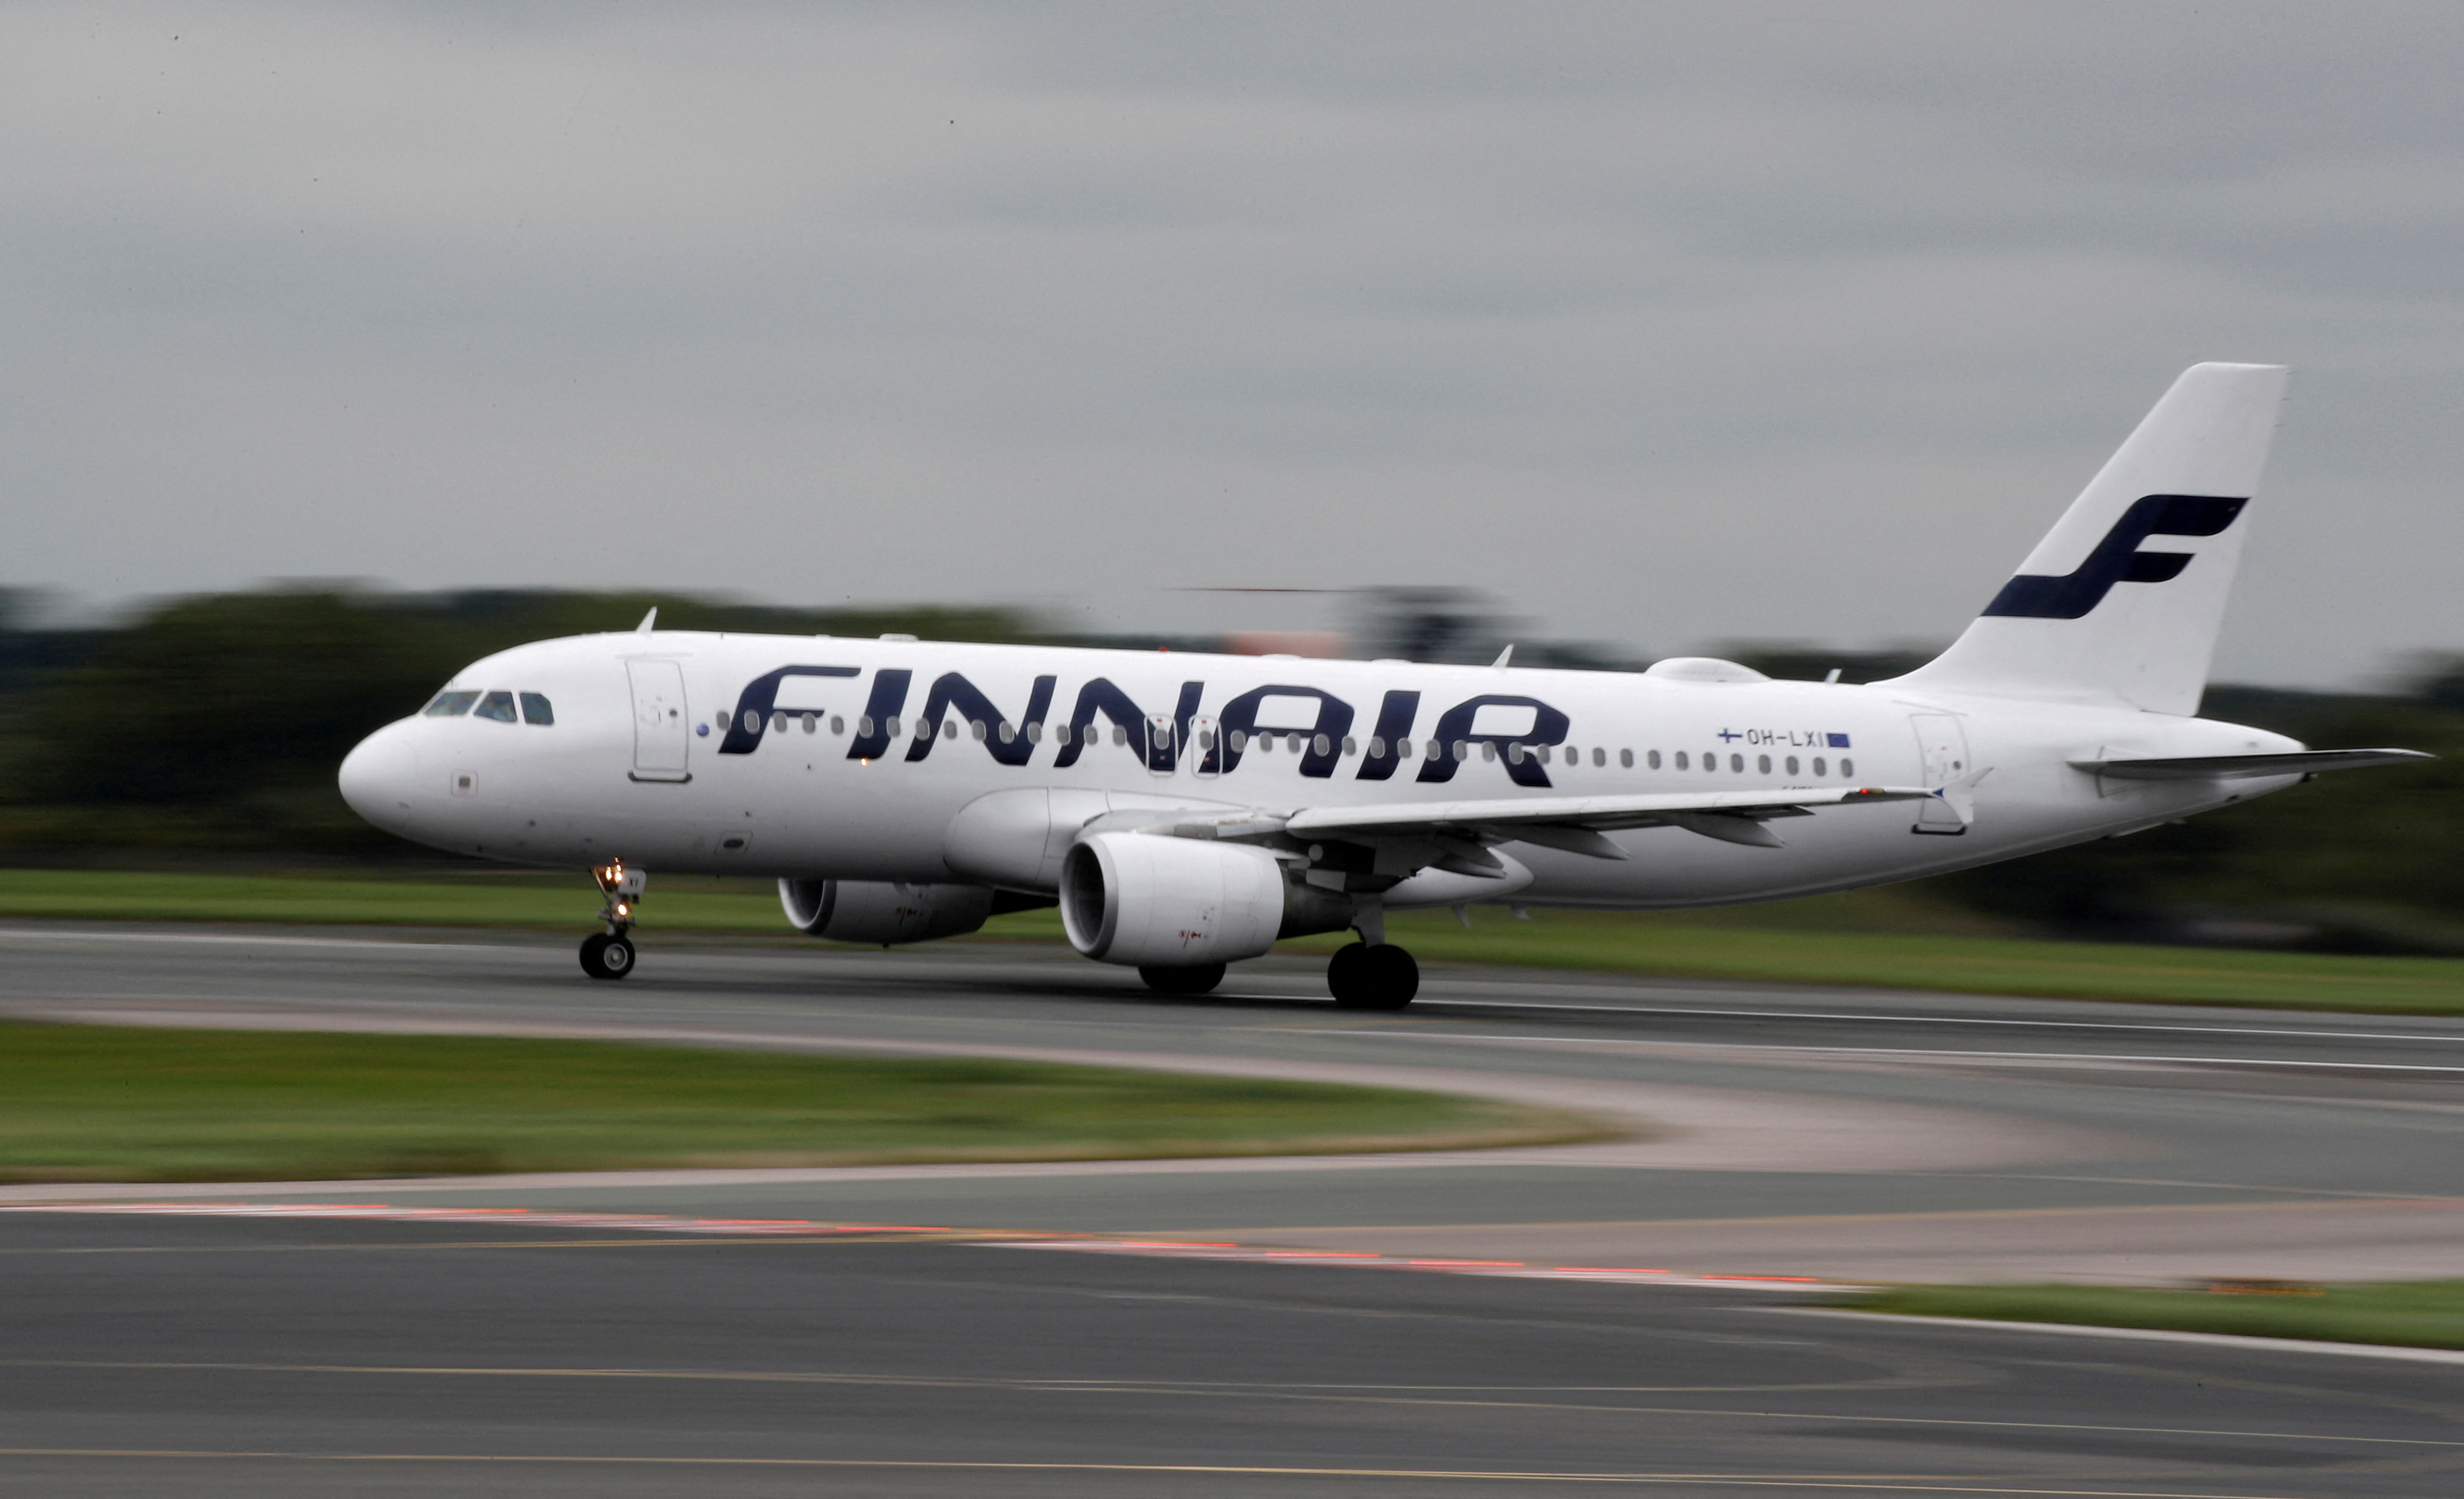 A Finnair Airbus A320 aircraft prepares to take off from Manchester Airport in Manchester